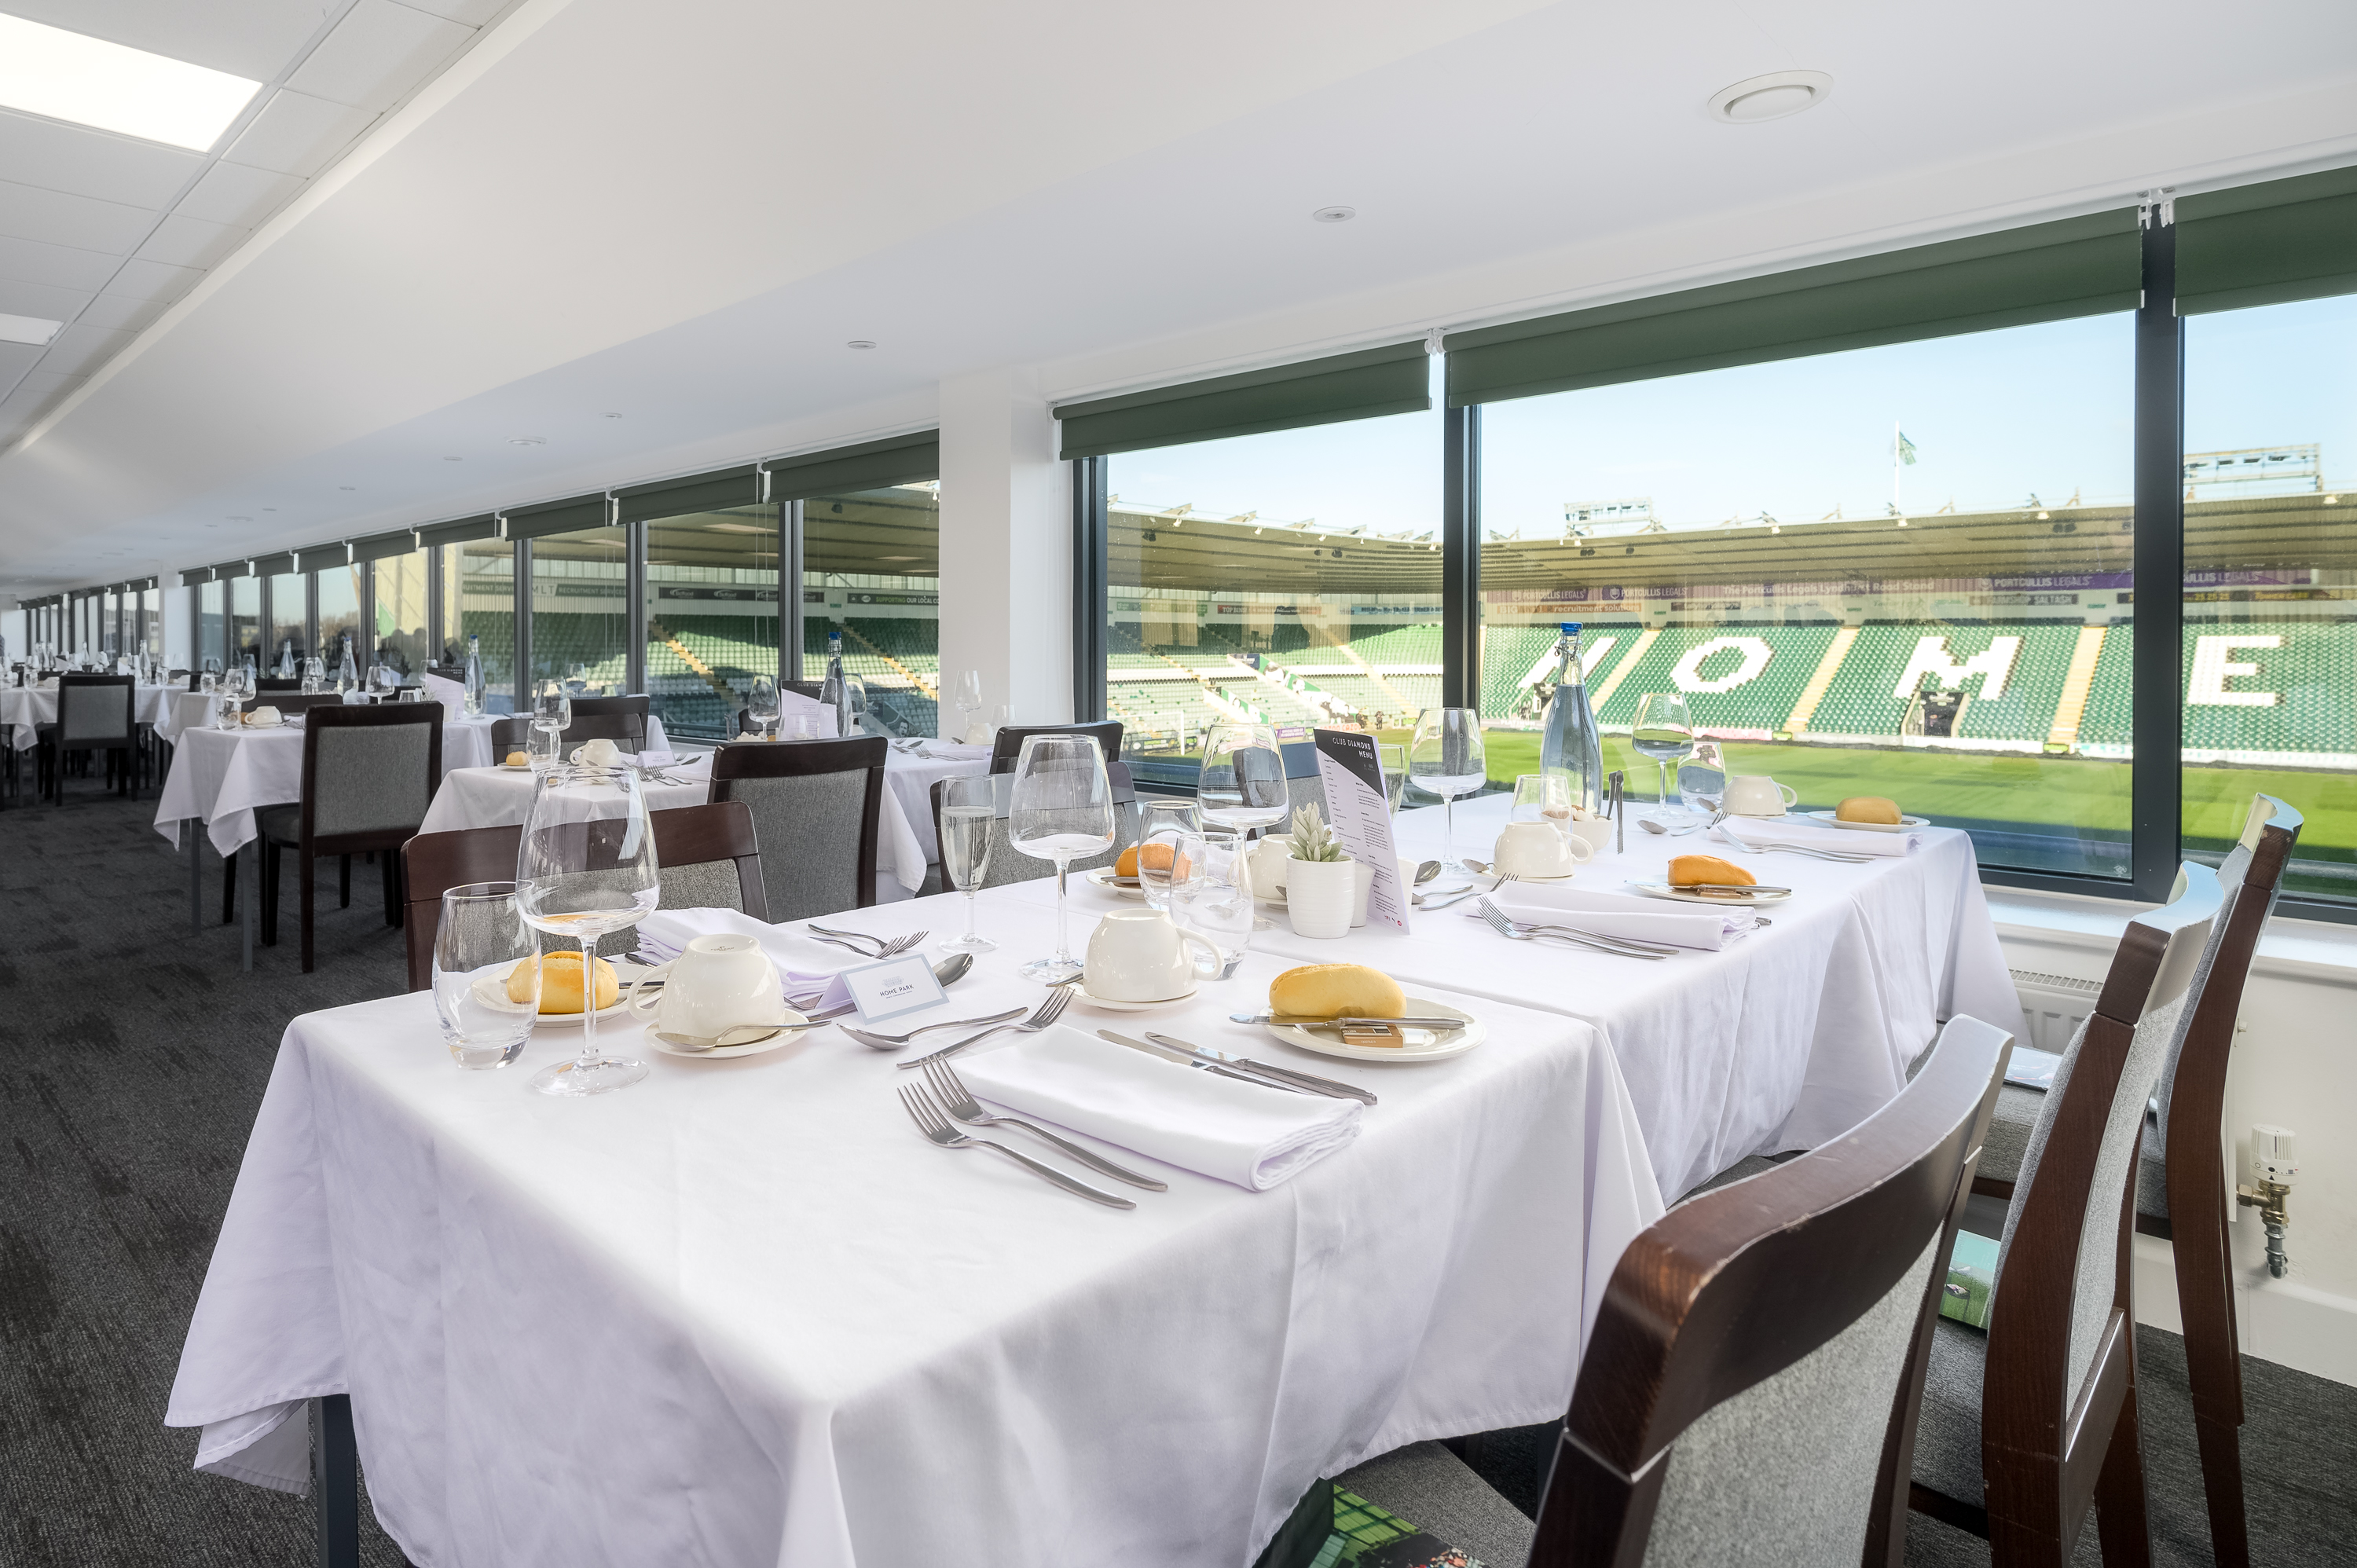 Hospitality at Home Park